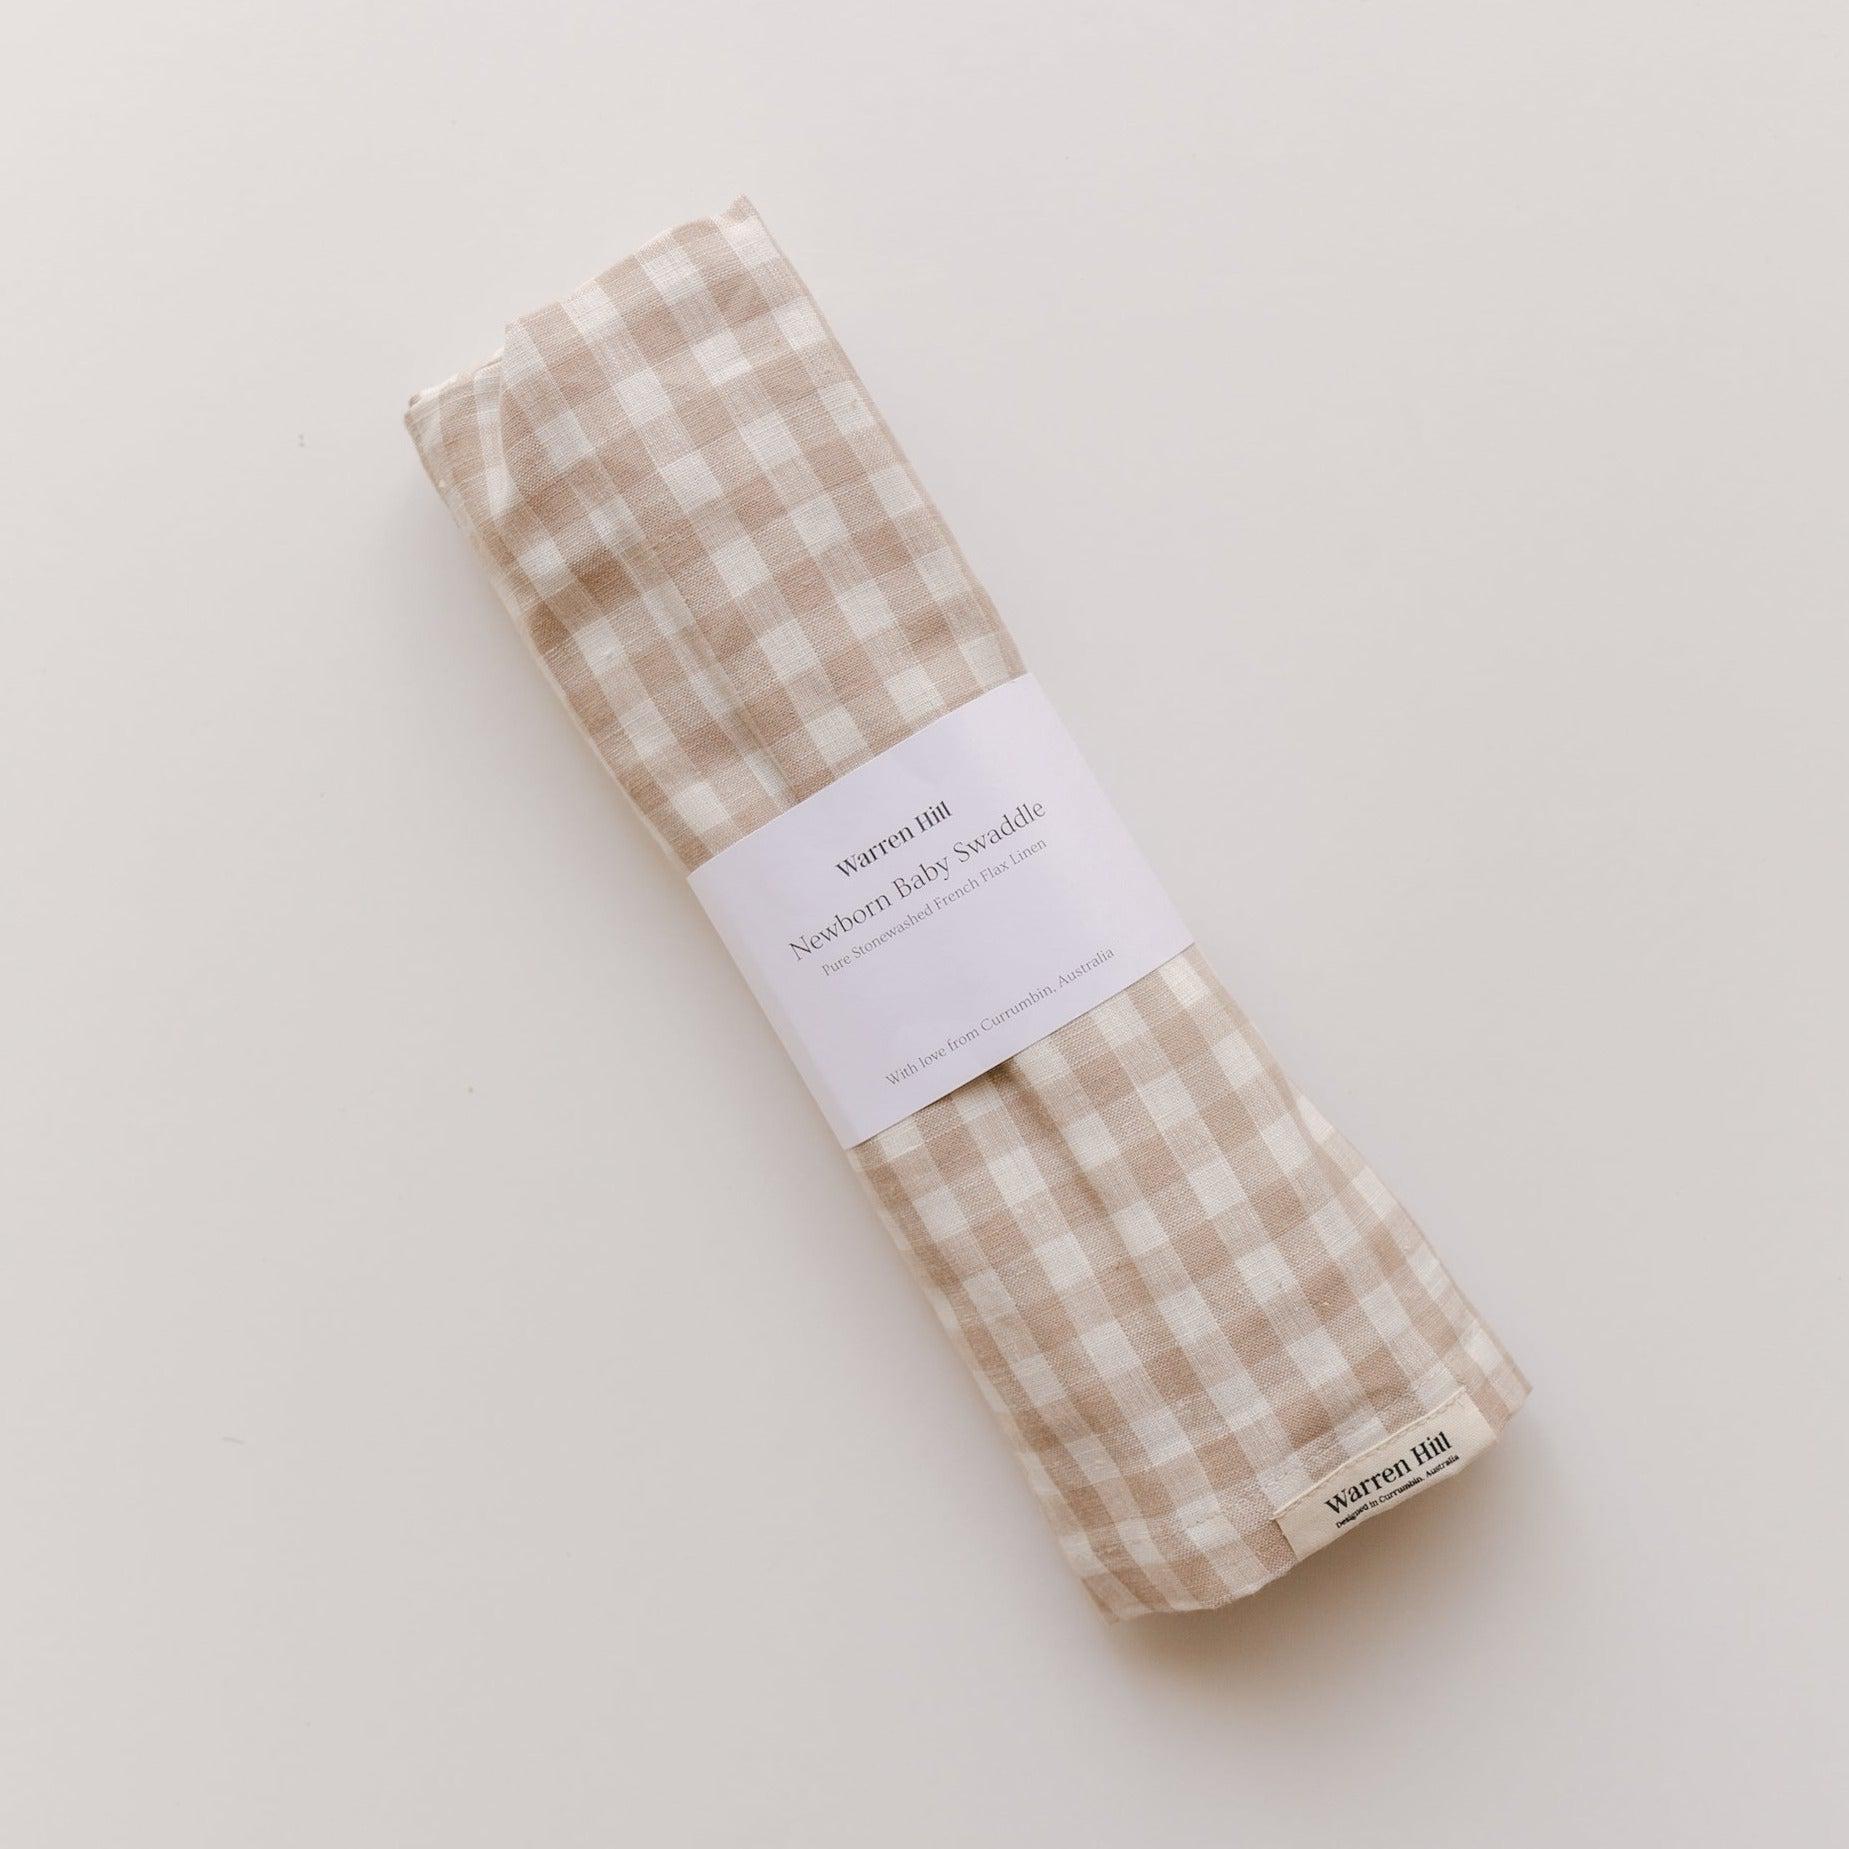 A beige and white gingham Warren Hill French linen baby swaddle on a white surface.